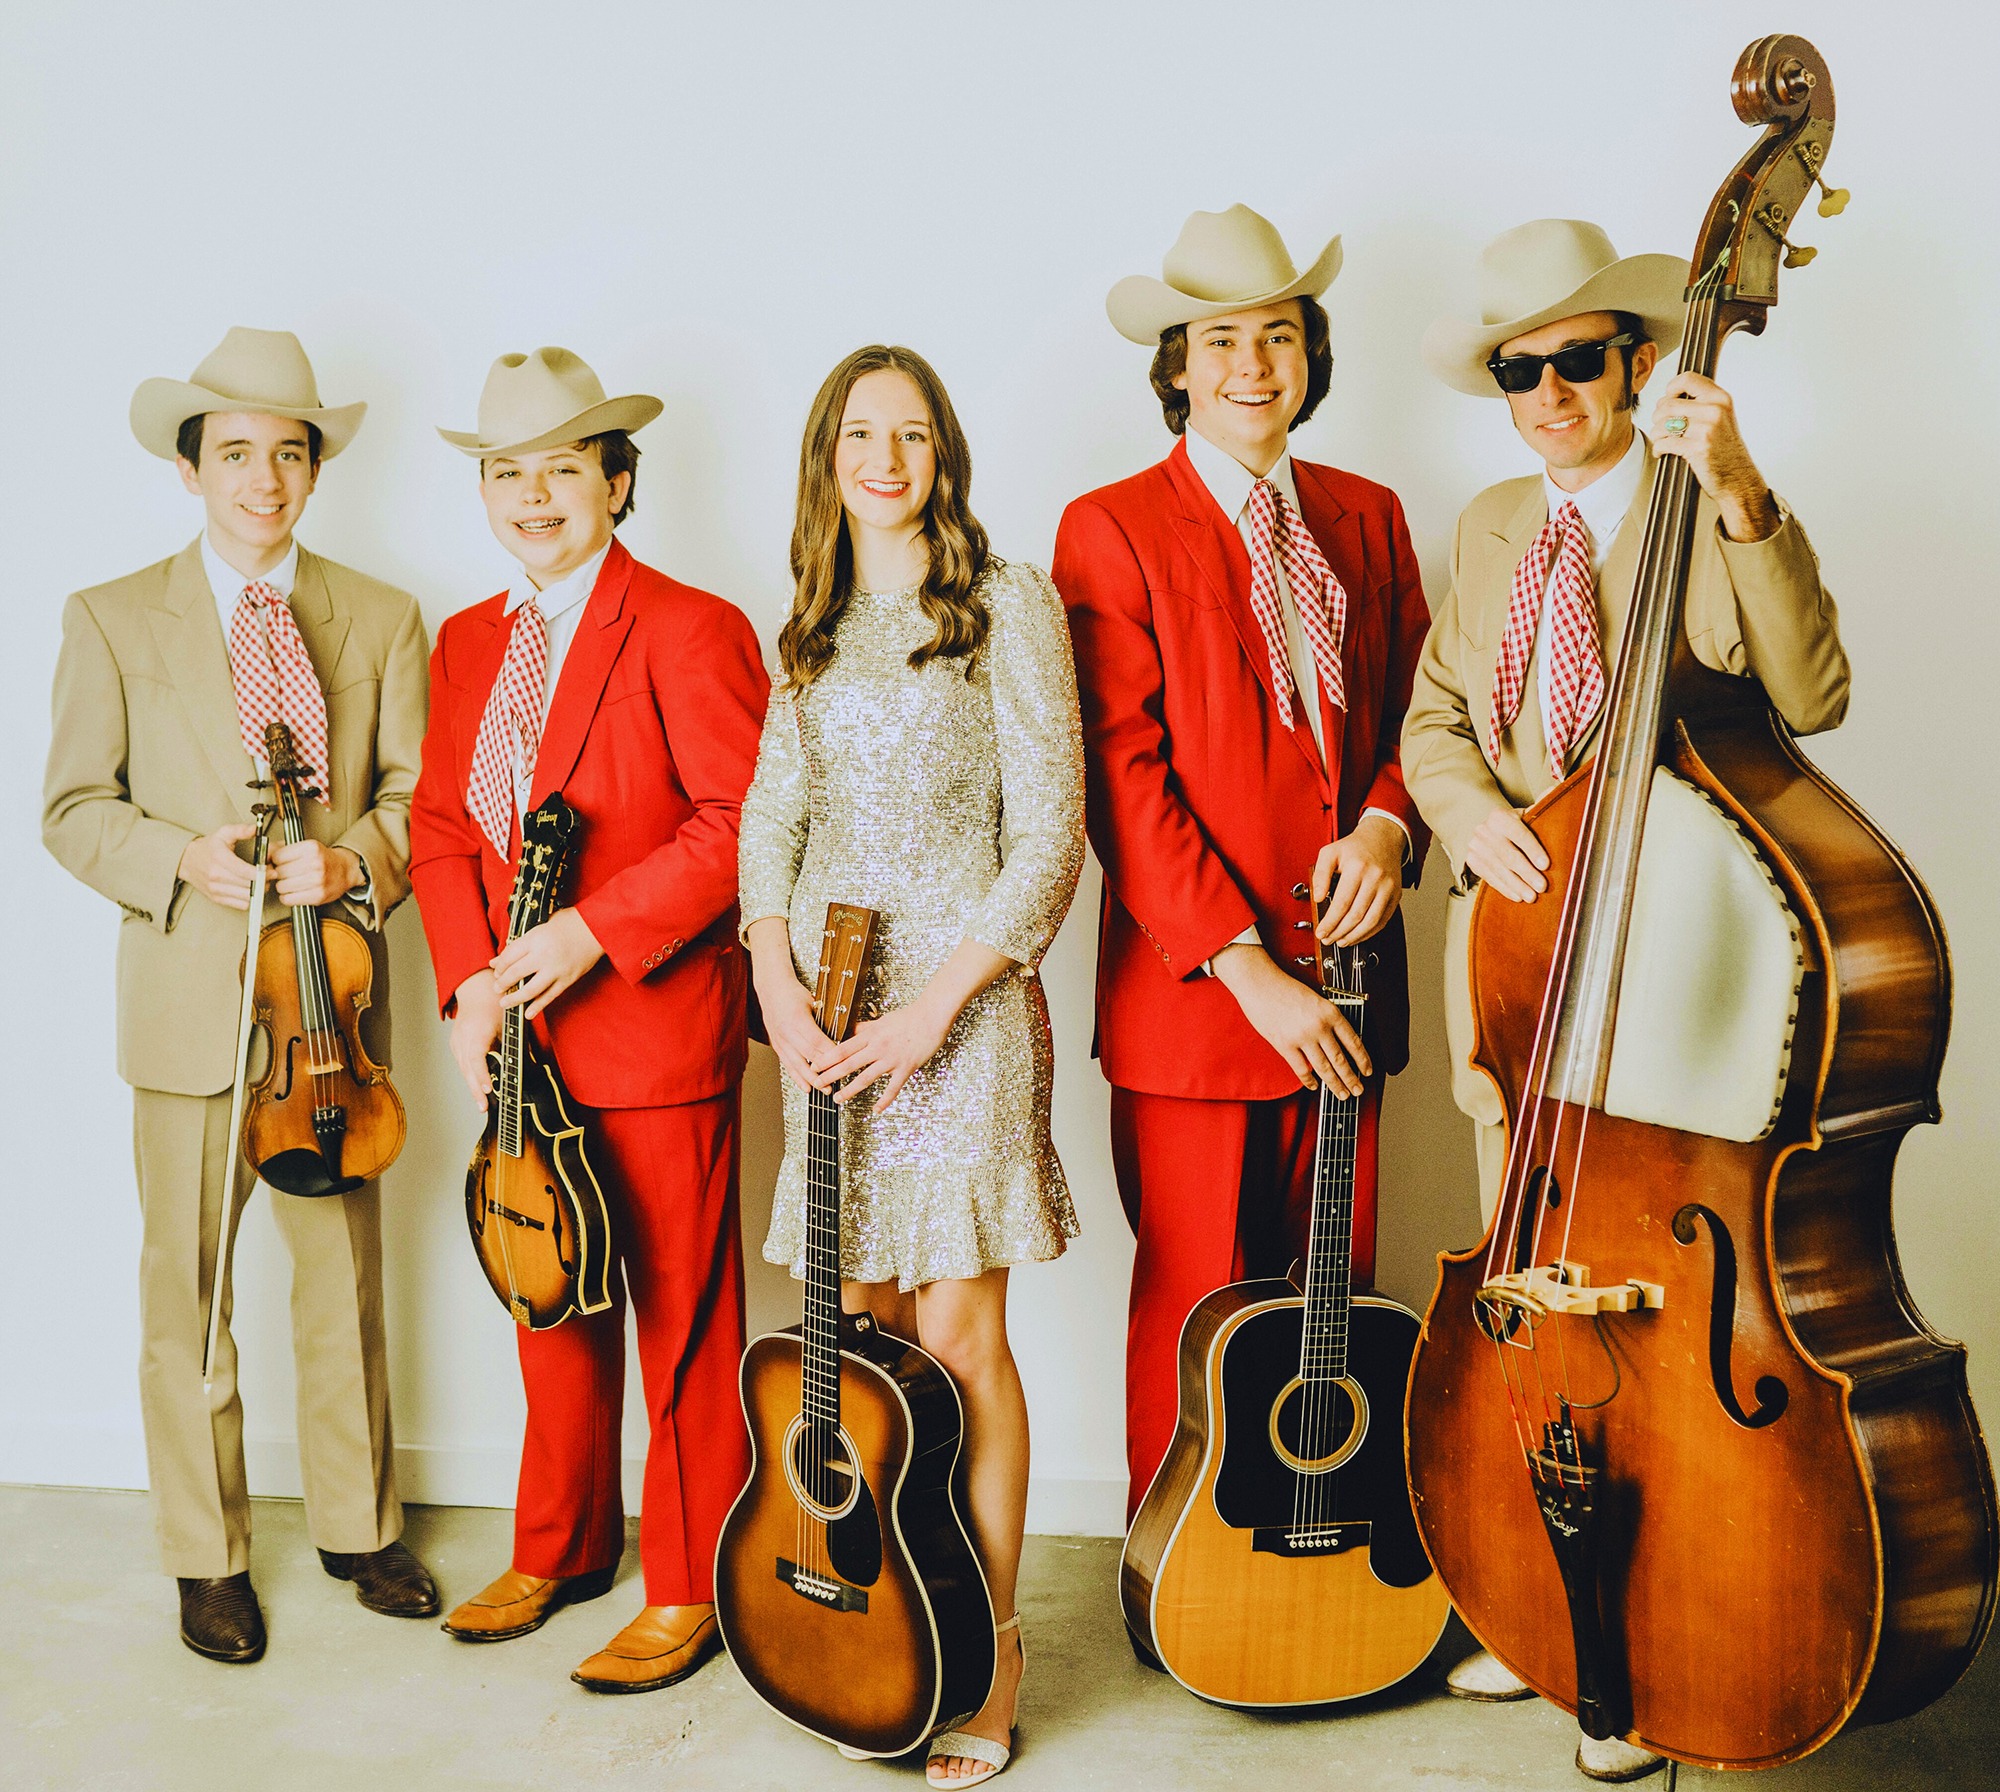 Cutter & Cash and The Kentucky Grass Infuse High-Energy Bluegrass Vibes into 'Mamas Don't Let Your Babies Grow Up to Be Cowboys'"